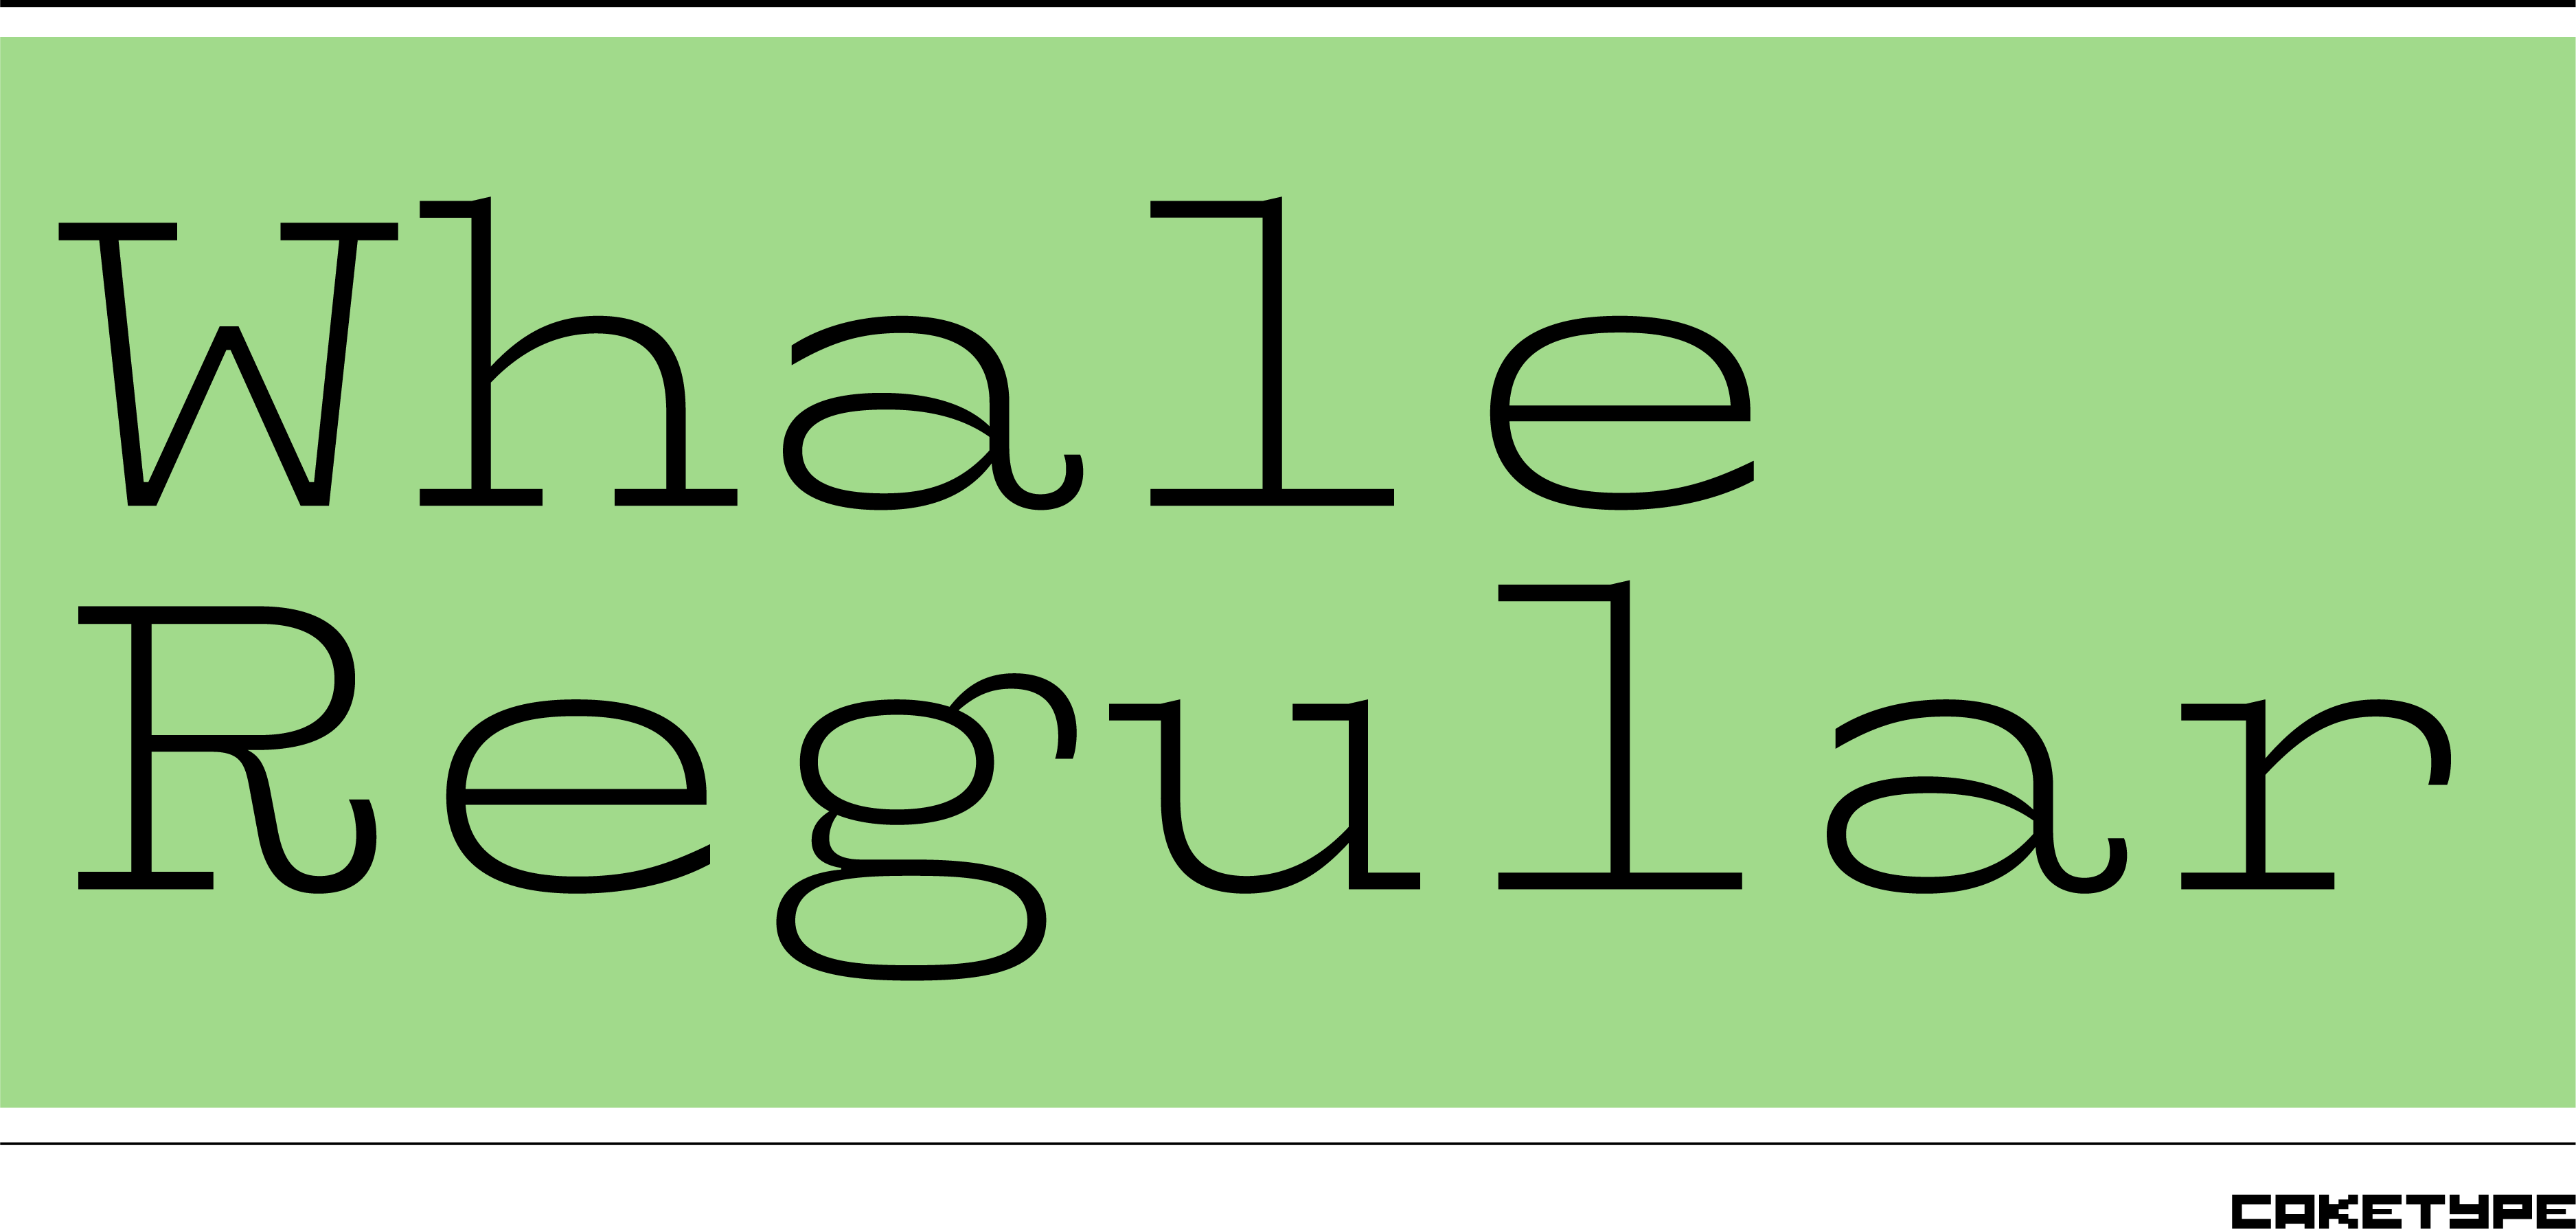 Card displaying Whale typeface in various styles